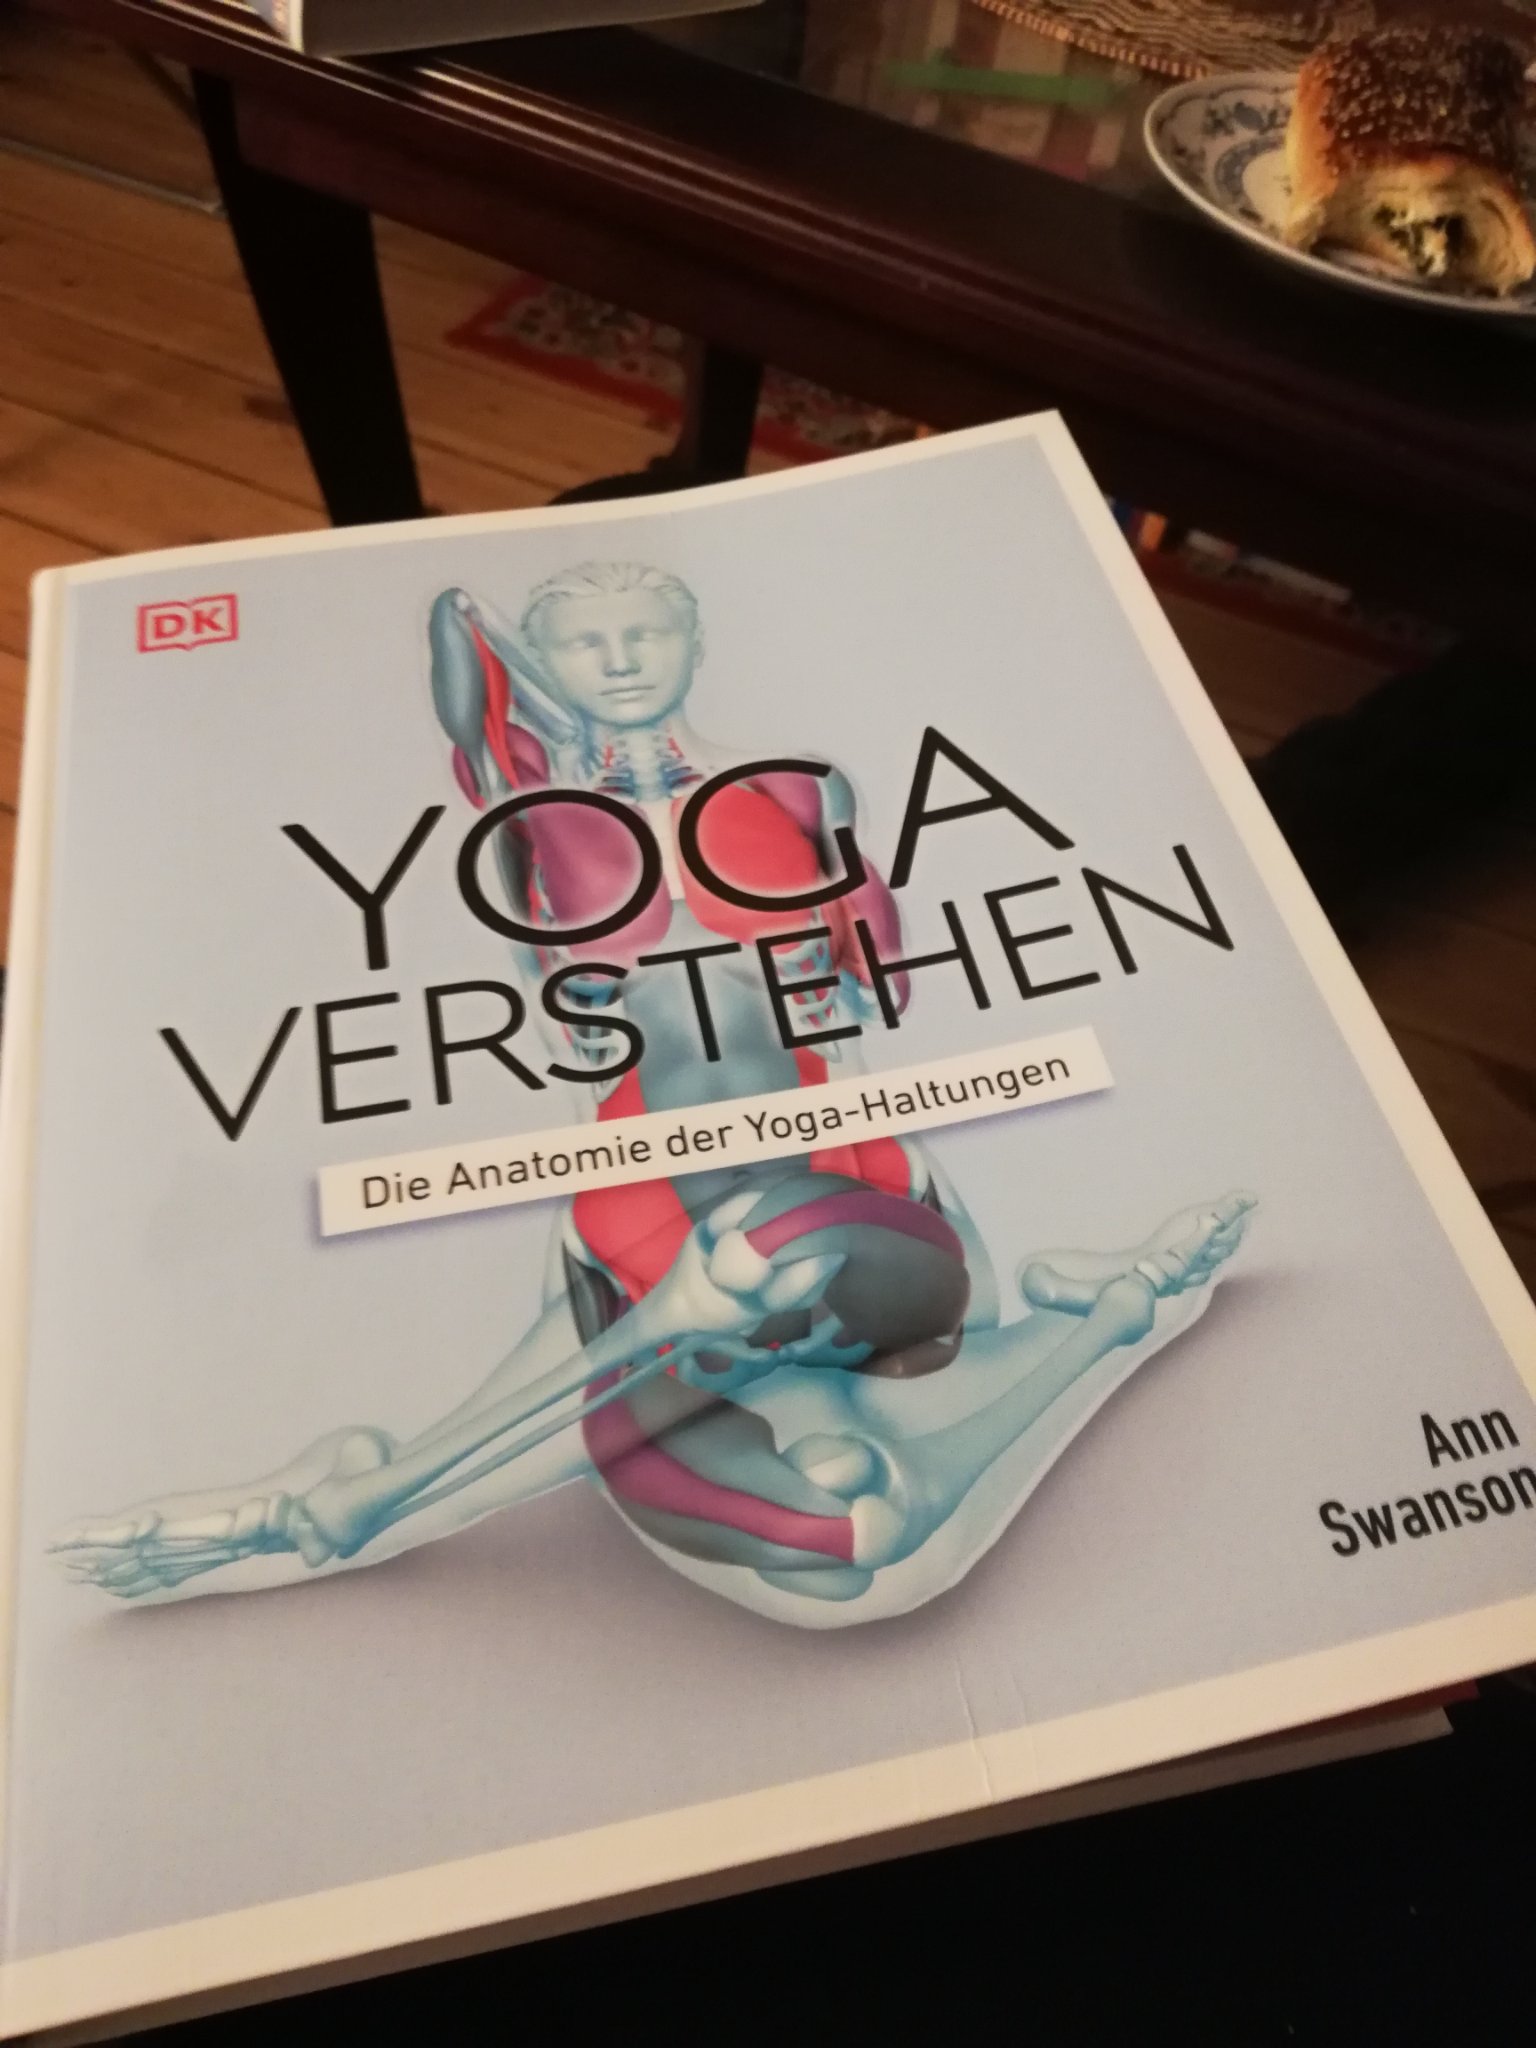 Tatsuro Suzuki 鈴木達朗 Annswansonyoga I Read Your Book In German It Is Really Good And I M Convinced With Your Anatomical And Scientific Knowledge Your Book Took Away My Skepticism About